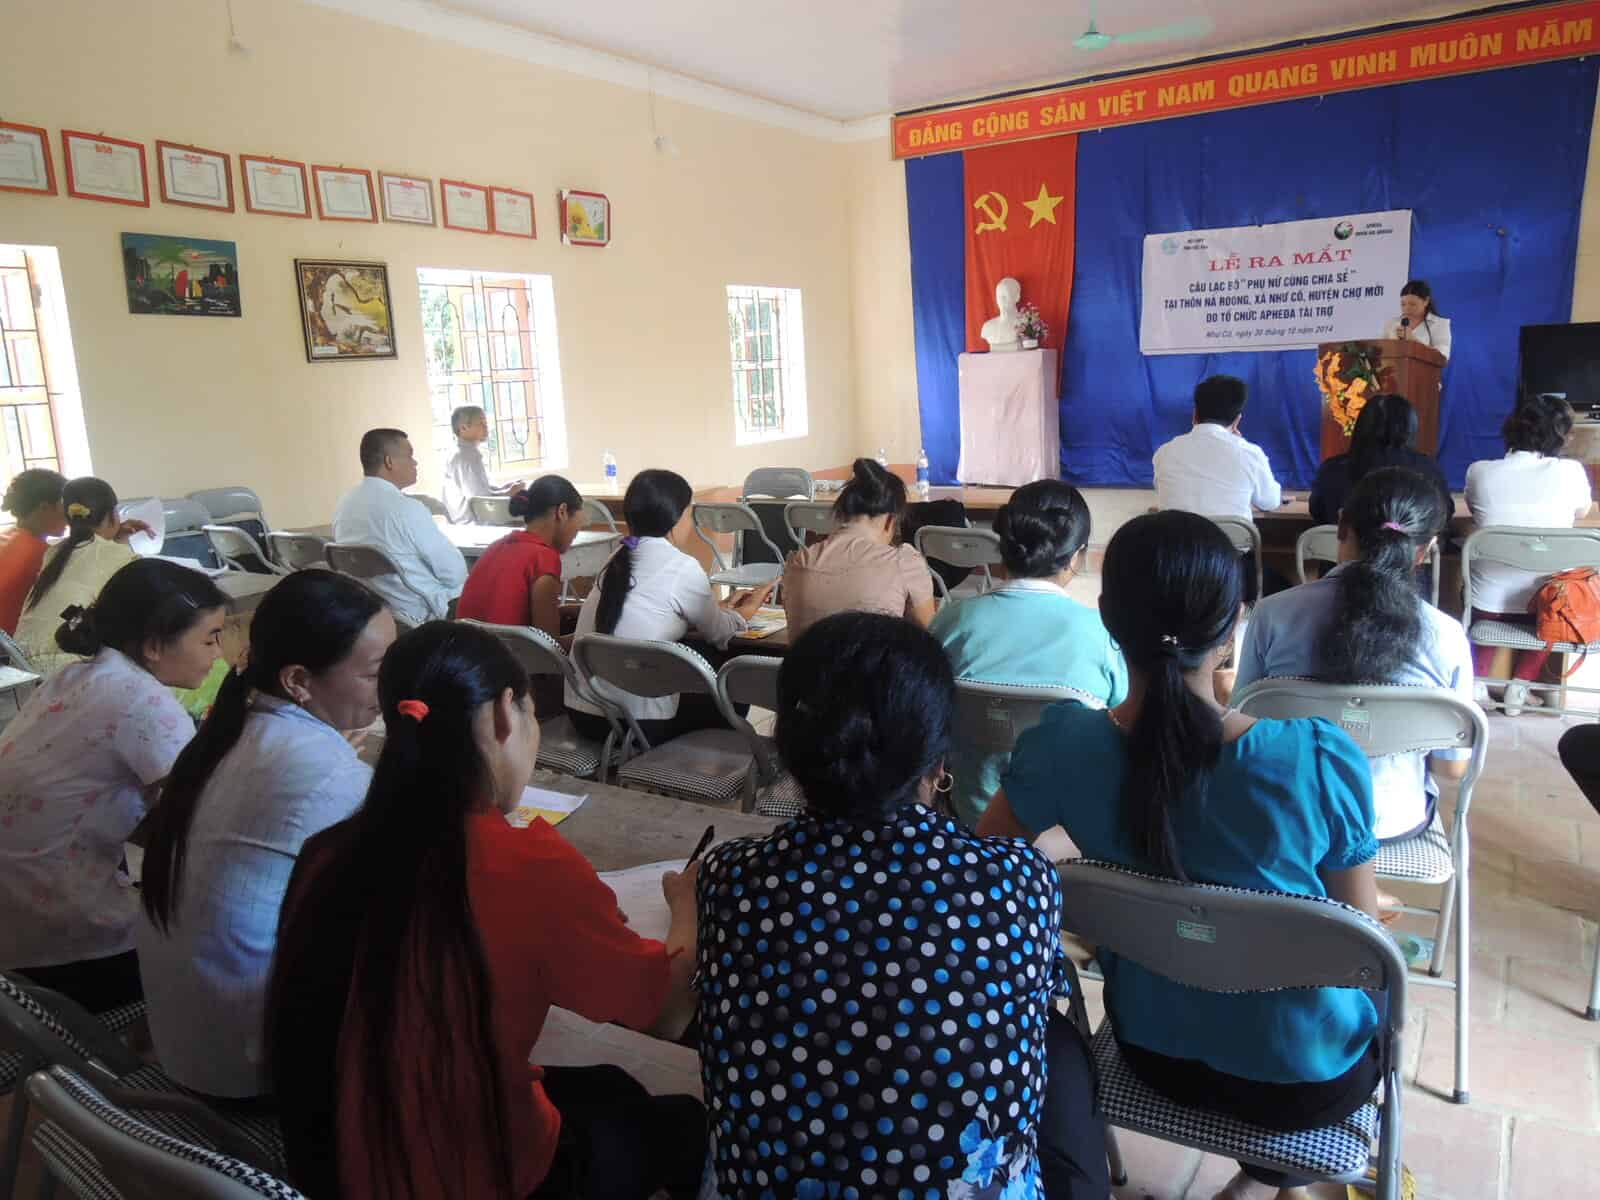 APHEDA has been working with the Women’s Union in Bac Kan Province on reducing the incidence of domestic violence.